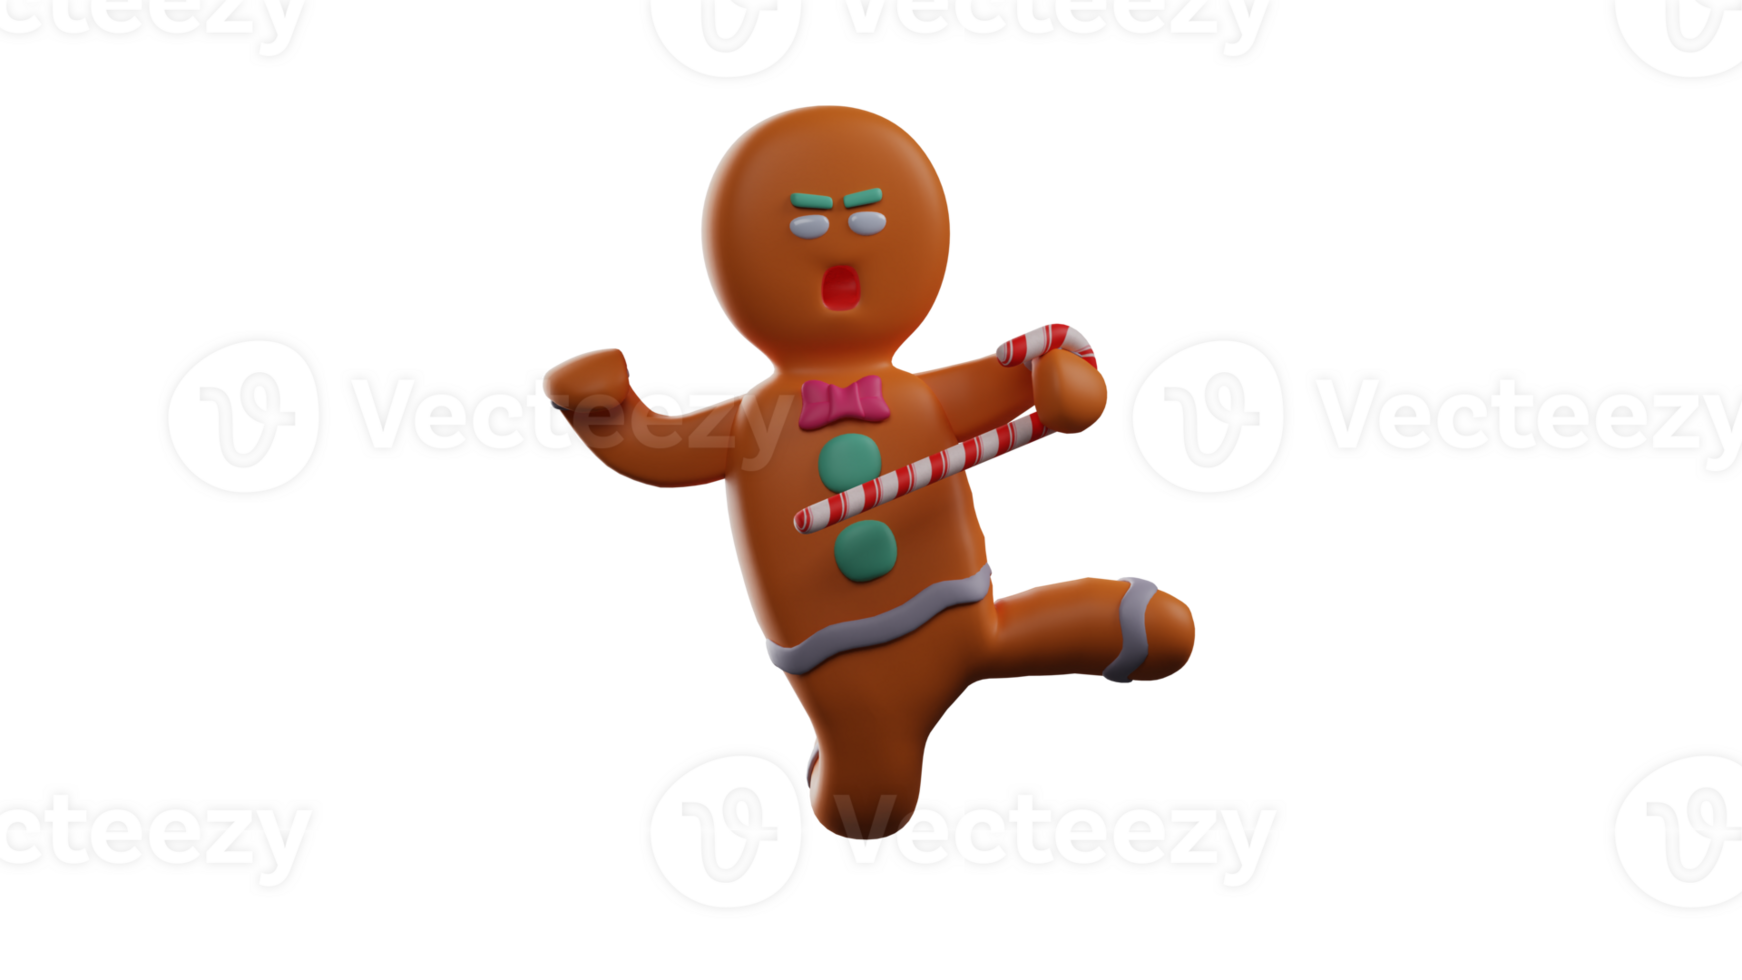 3D illustration. Brave Gingerbread 3D Cartoon Character. Gingerbread in the pose of kicking something and showed an angry expression. Gingerbread carries a stick for weapons. 3D Cartoon Character png